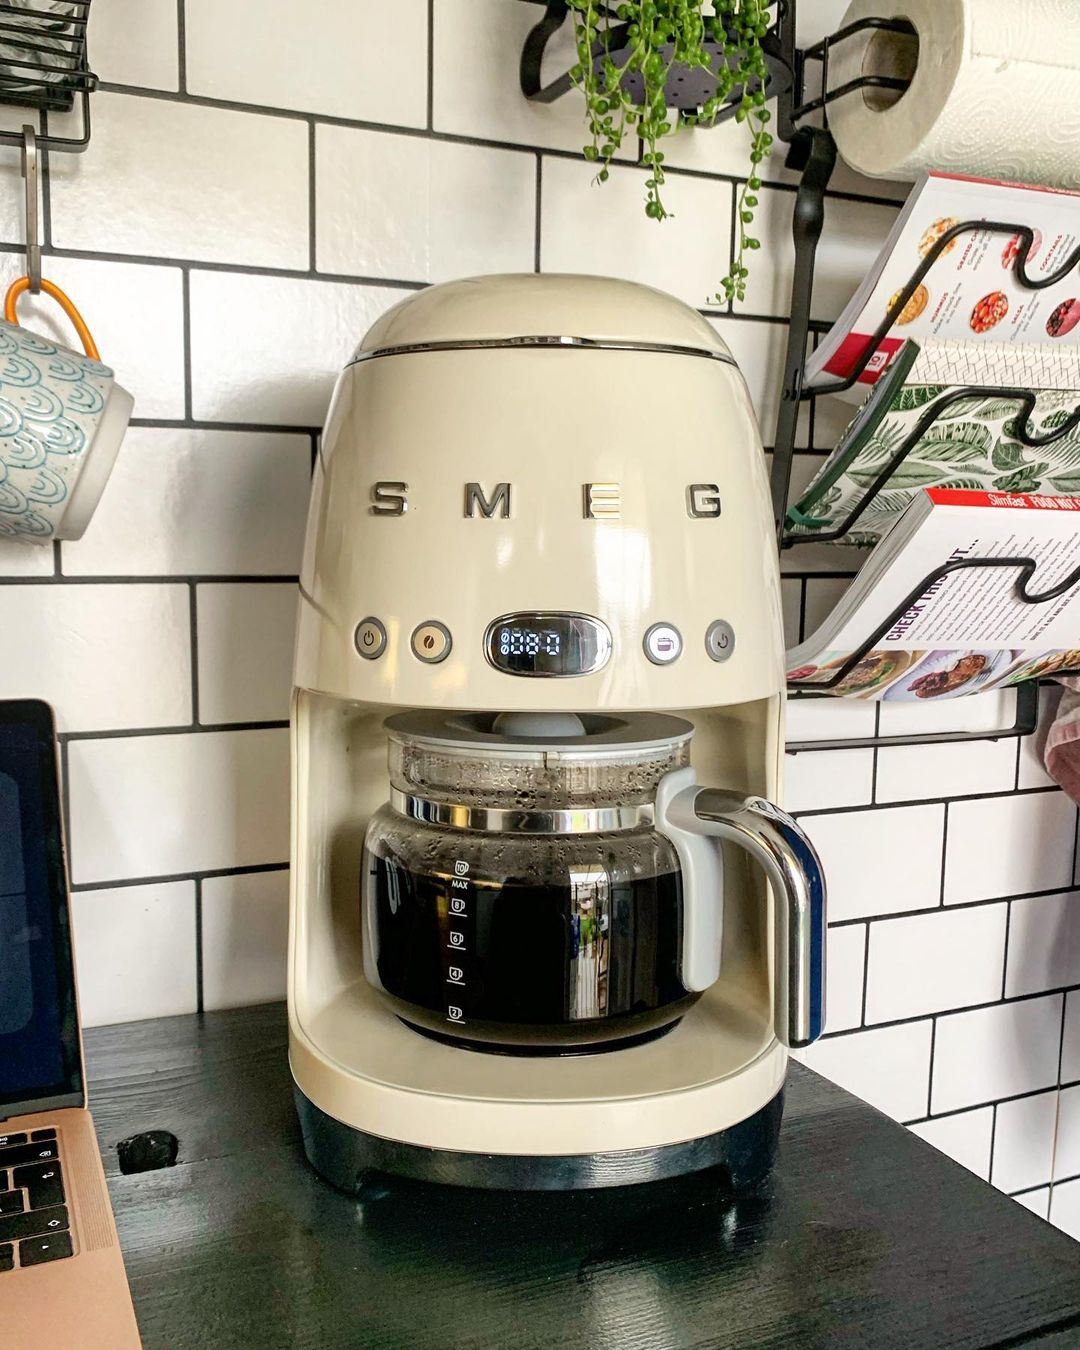 Green Coffee Maker from Smeg. Photo by Instagram user @house_n_hound